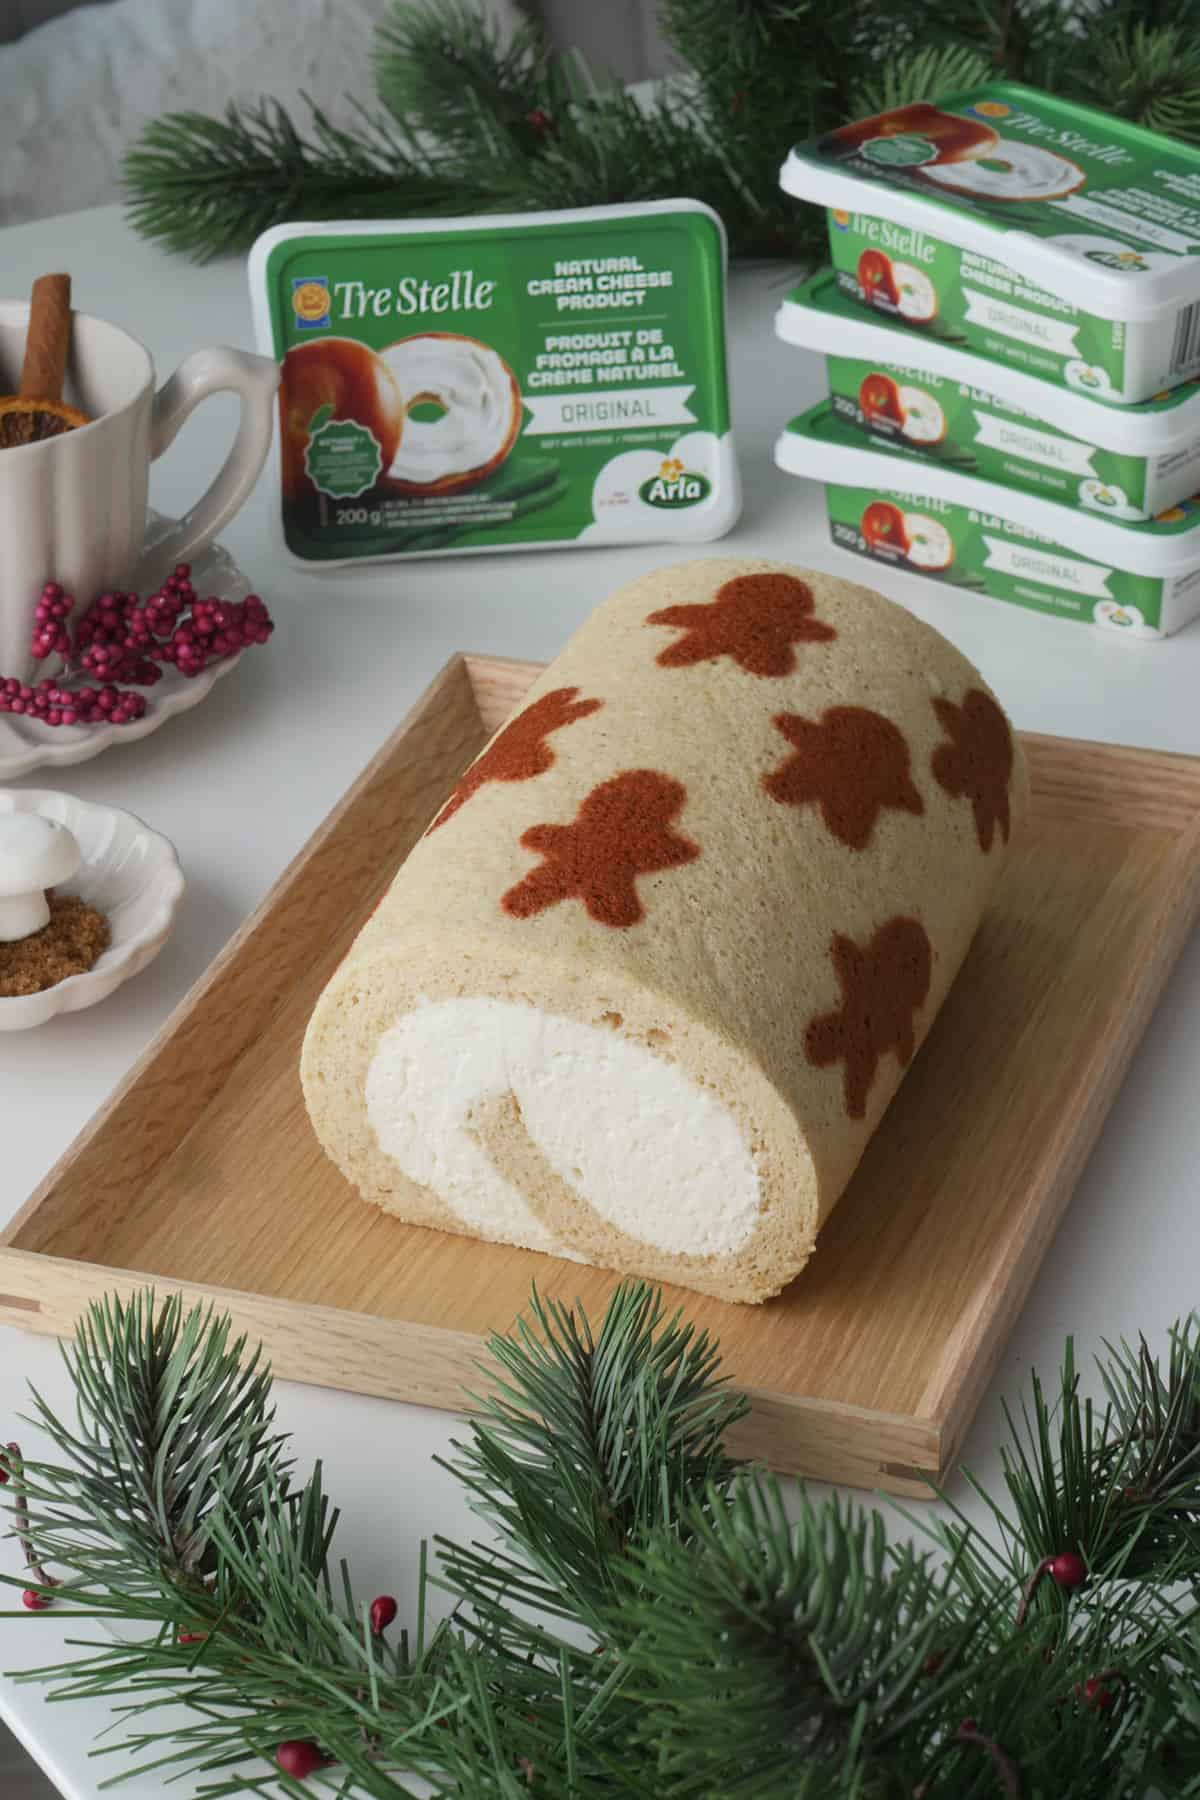 A festive cake roll with holiday patterns printed on it is on a wooden serving tray with some cream cheese packets in the background.